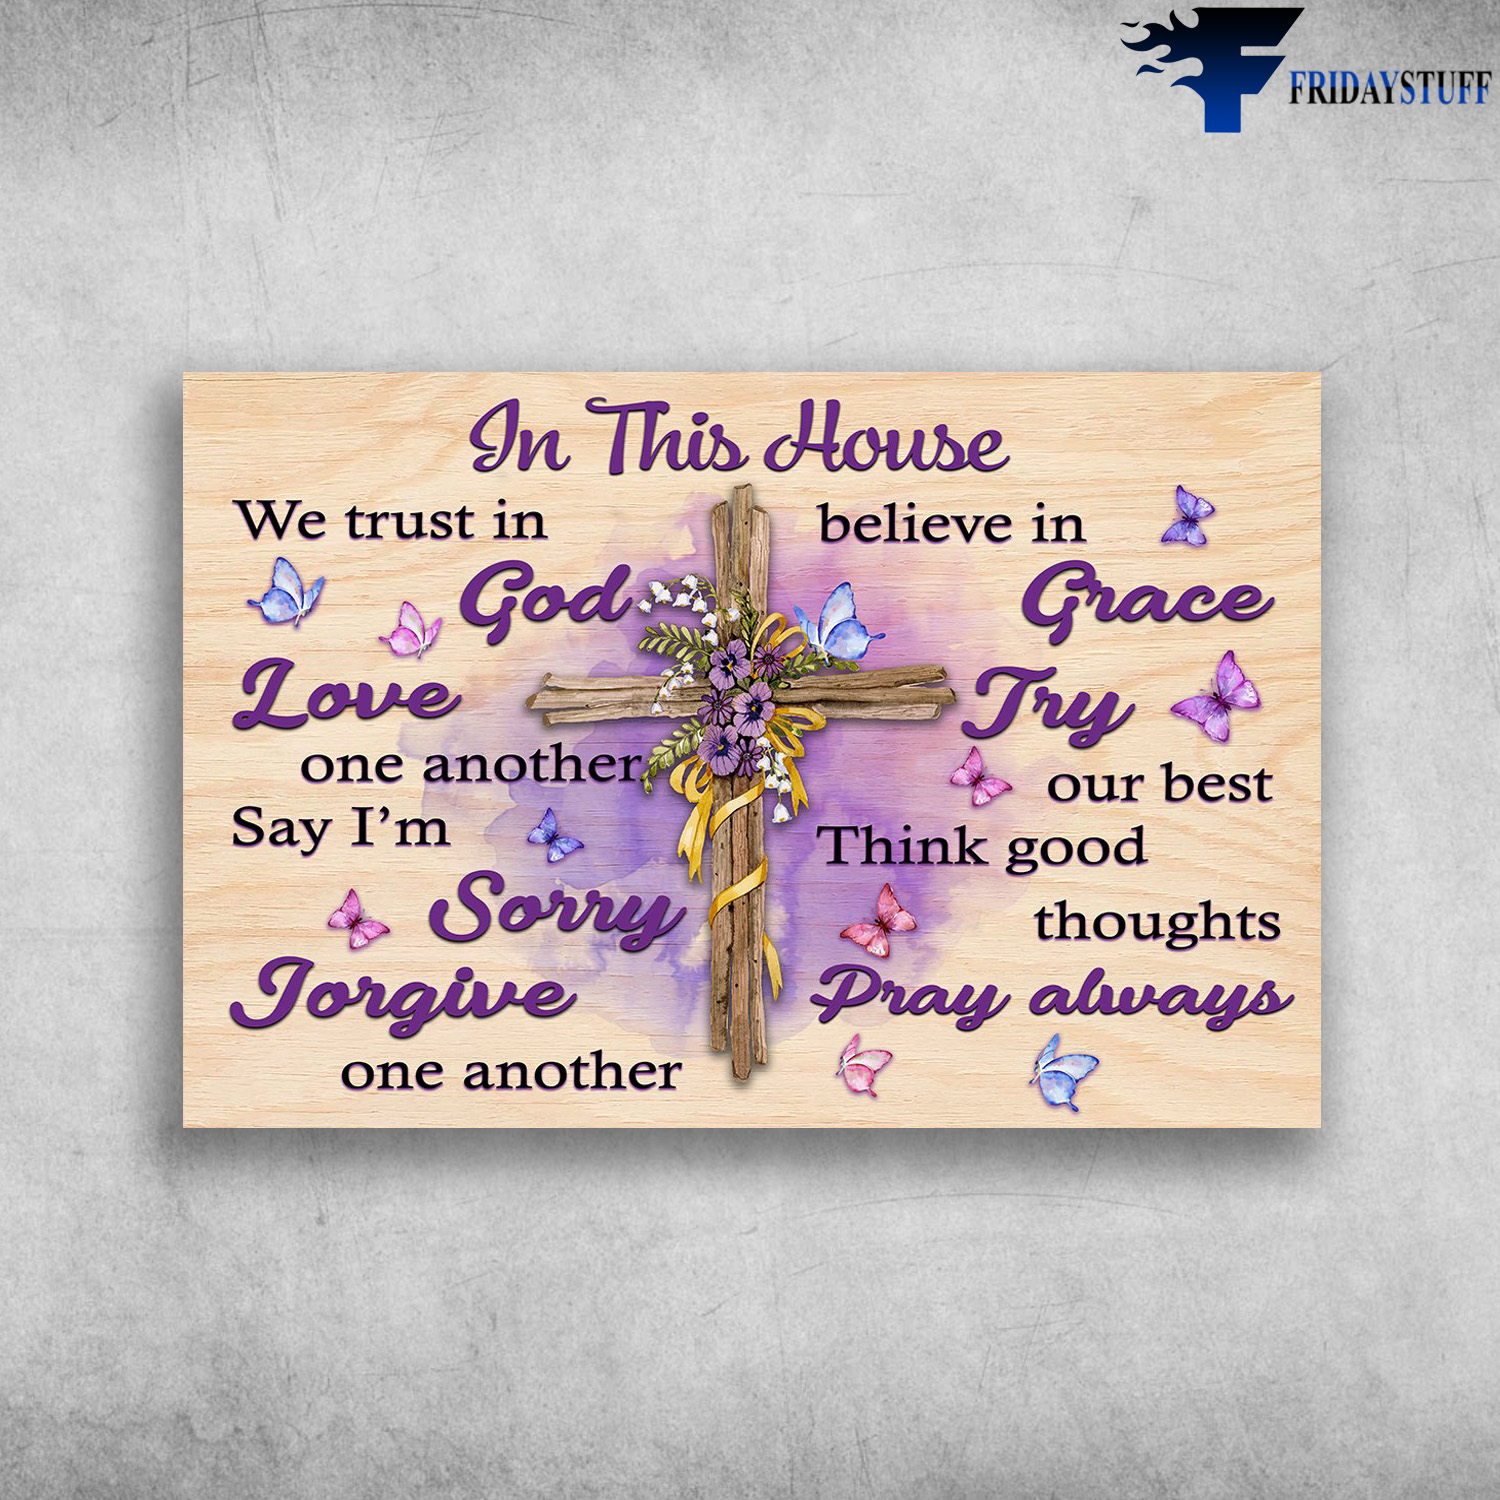 Jesus Butterfly - In This House, We Trust In God, Love One Another Say I'm Sorry Forgive One Another, Believe In Grace, Try Our Best Think Good Thoughts Pray Always